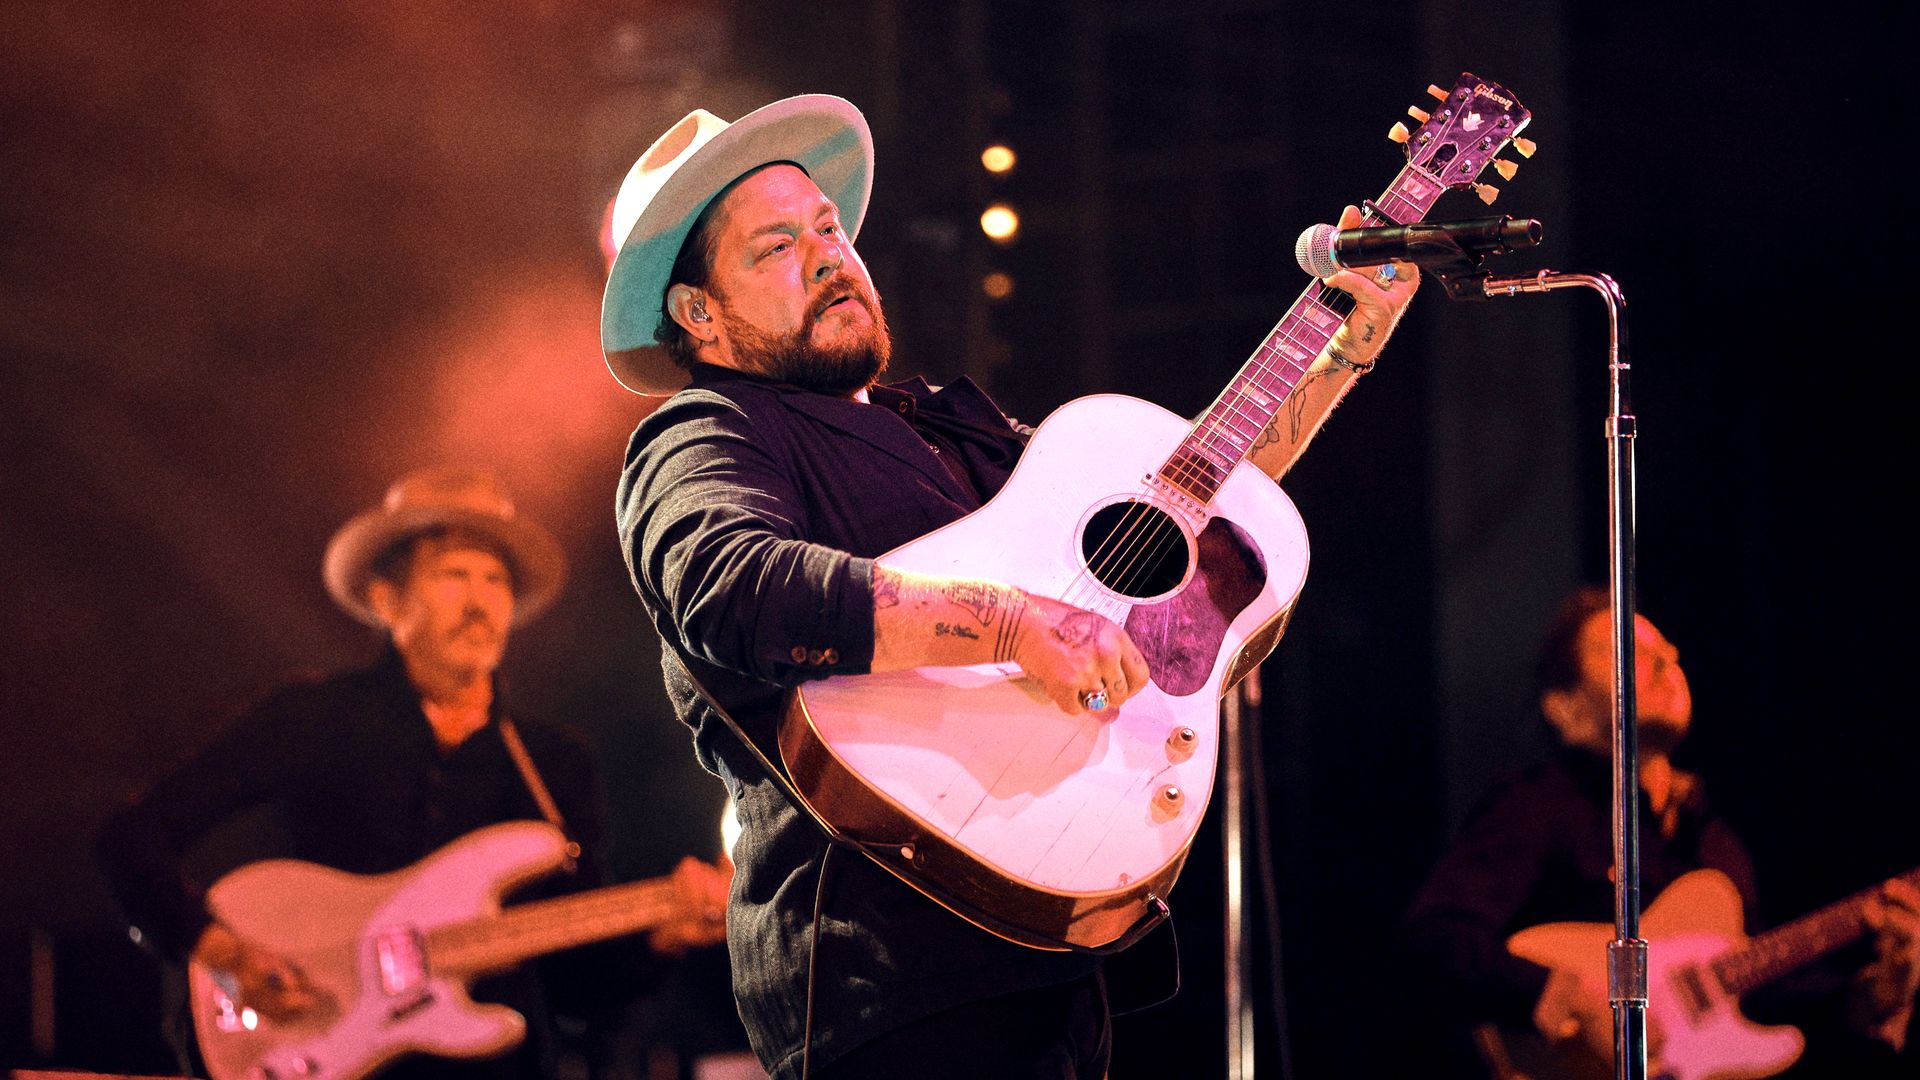 Nathaniel Rateliff performs. Photo: Jason Kempin/Getty Images